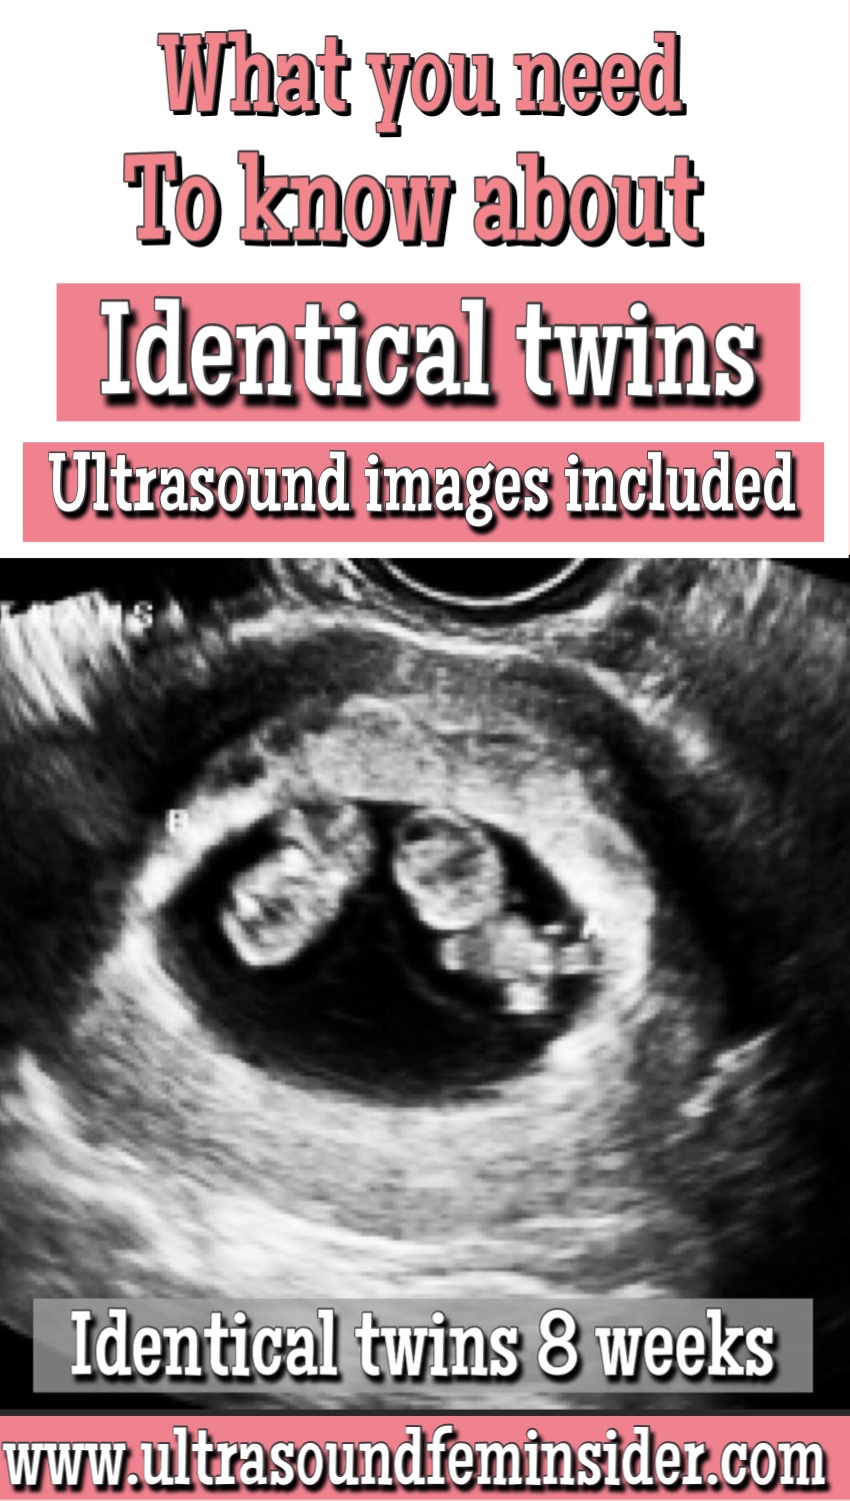 Everything you need to know about Identical Twins. Ultrasound included.